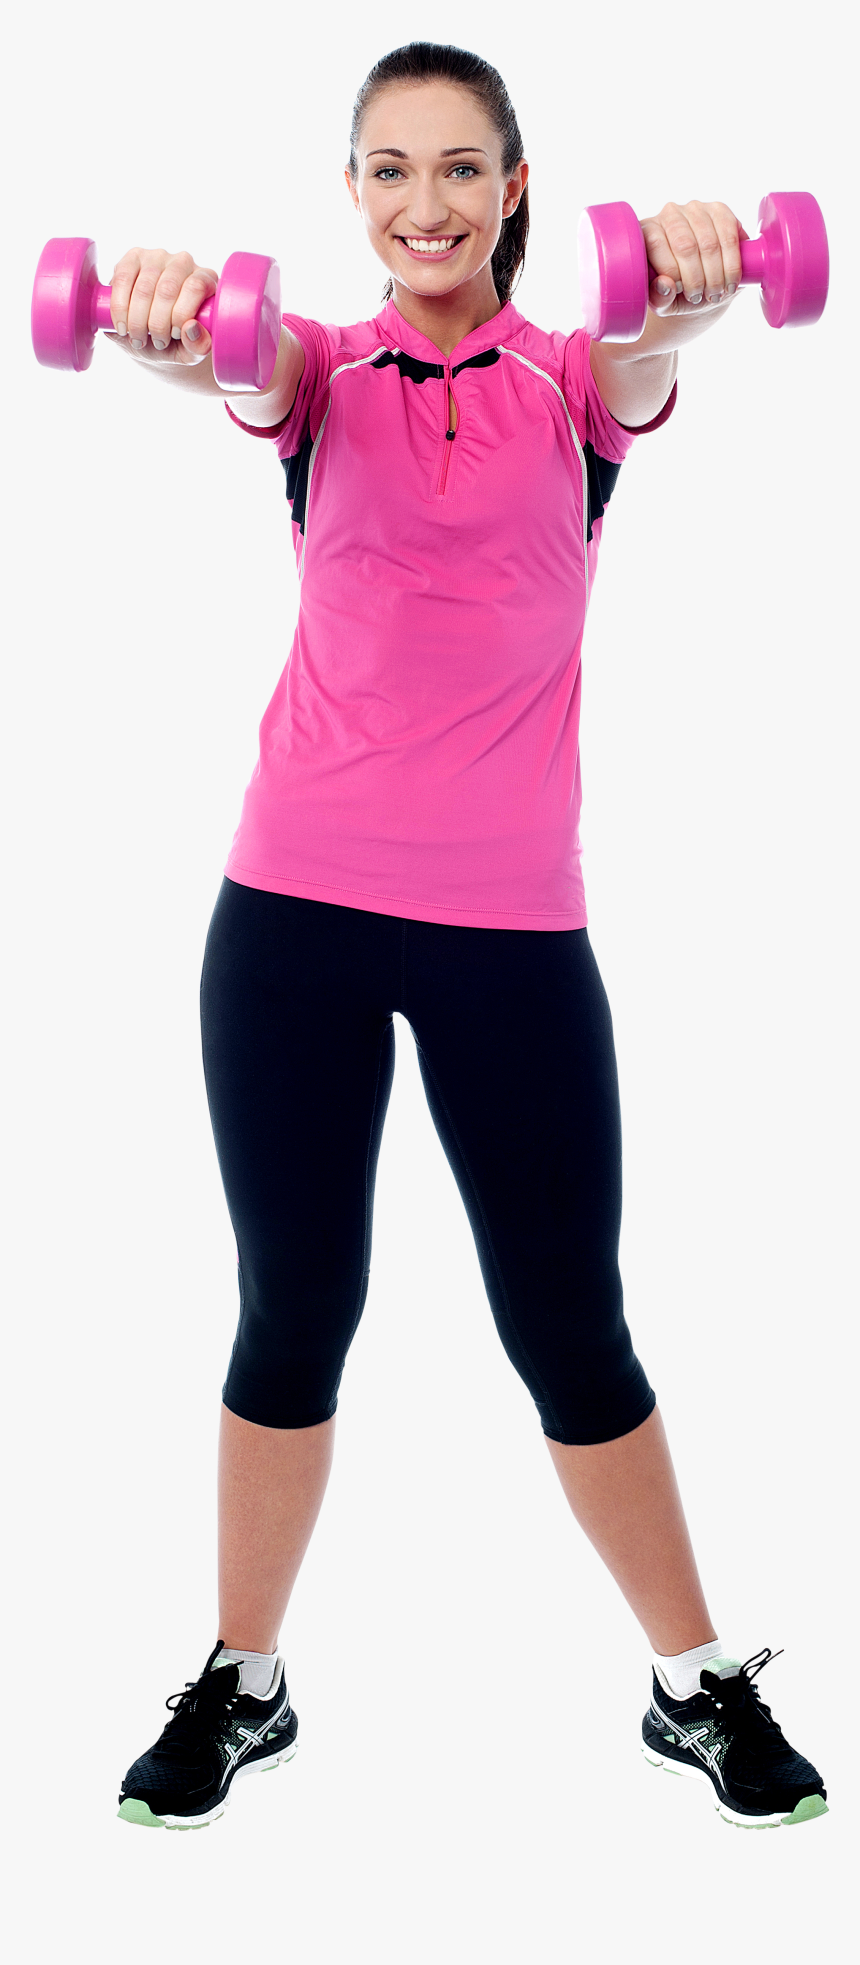 Women Exercise Png, Transparent Png, Free Download